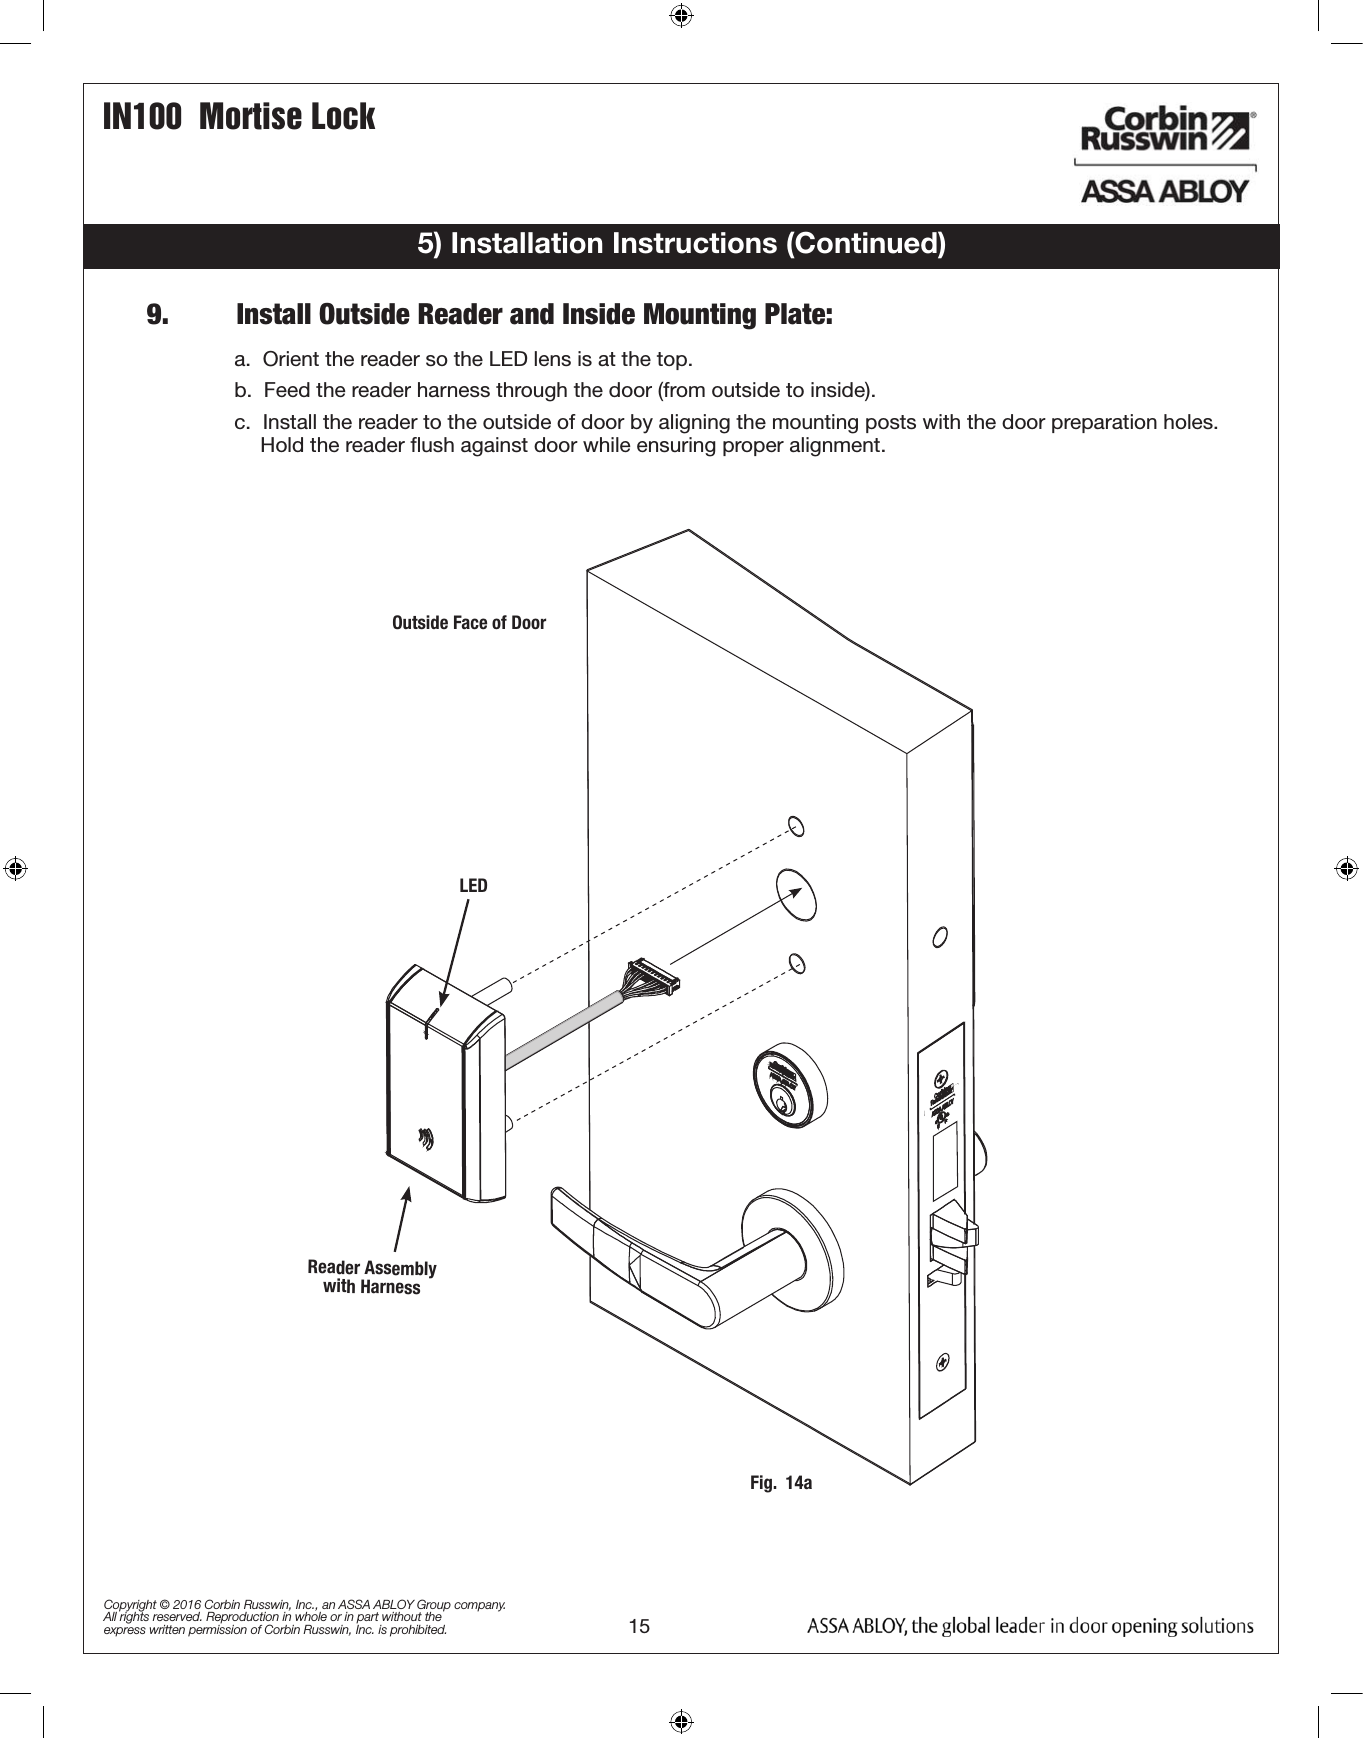 IN100  Mortise Lock15Copyright © 2016 Corbin Russwin, Inc., an ASSA ABLOY Group company. All rights reserved. Reproduction in whole or in part without the express written permission of Corbin Russwin, Inc. is prohibited.9.   Install Outside Reader and Inside Mounting Plate:Fig.  14aOutside Face of DoorReader Assembly with HarnessLED5) Installation Instructions (Continued)a.  Orient the reader so the LED lens is at the top.b.  Feed the reader harness through the door (from outside to inside).c.  Install the reader to the outside of door by aligning the mounting posts with the door preparation holes.                 Hold the reader ﬂush against door while ensuring proper alignment.